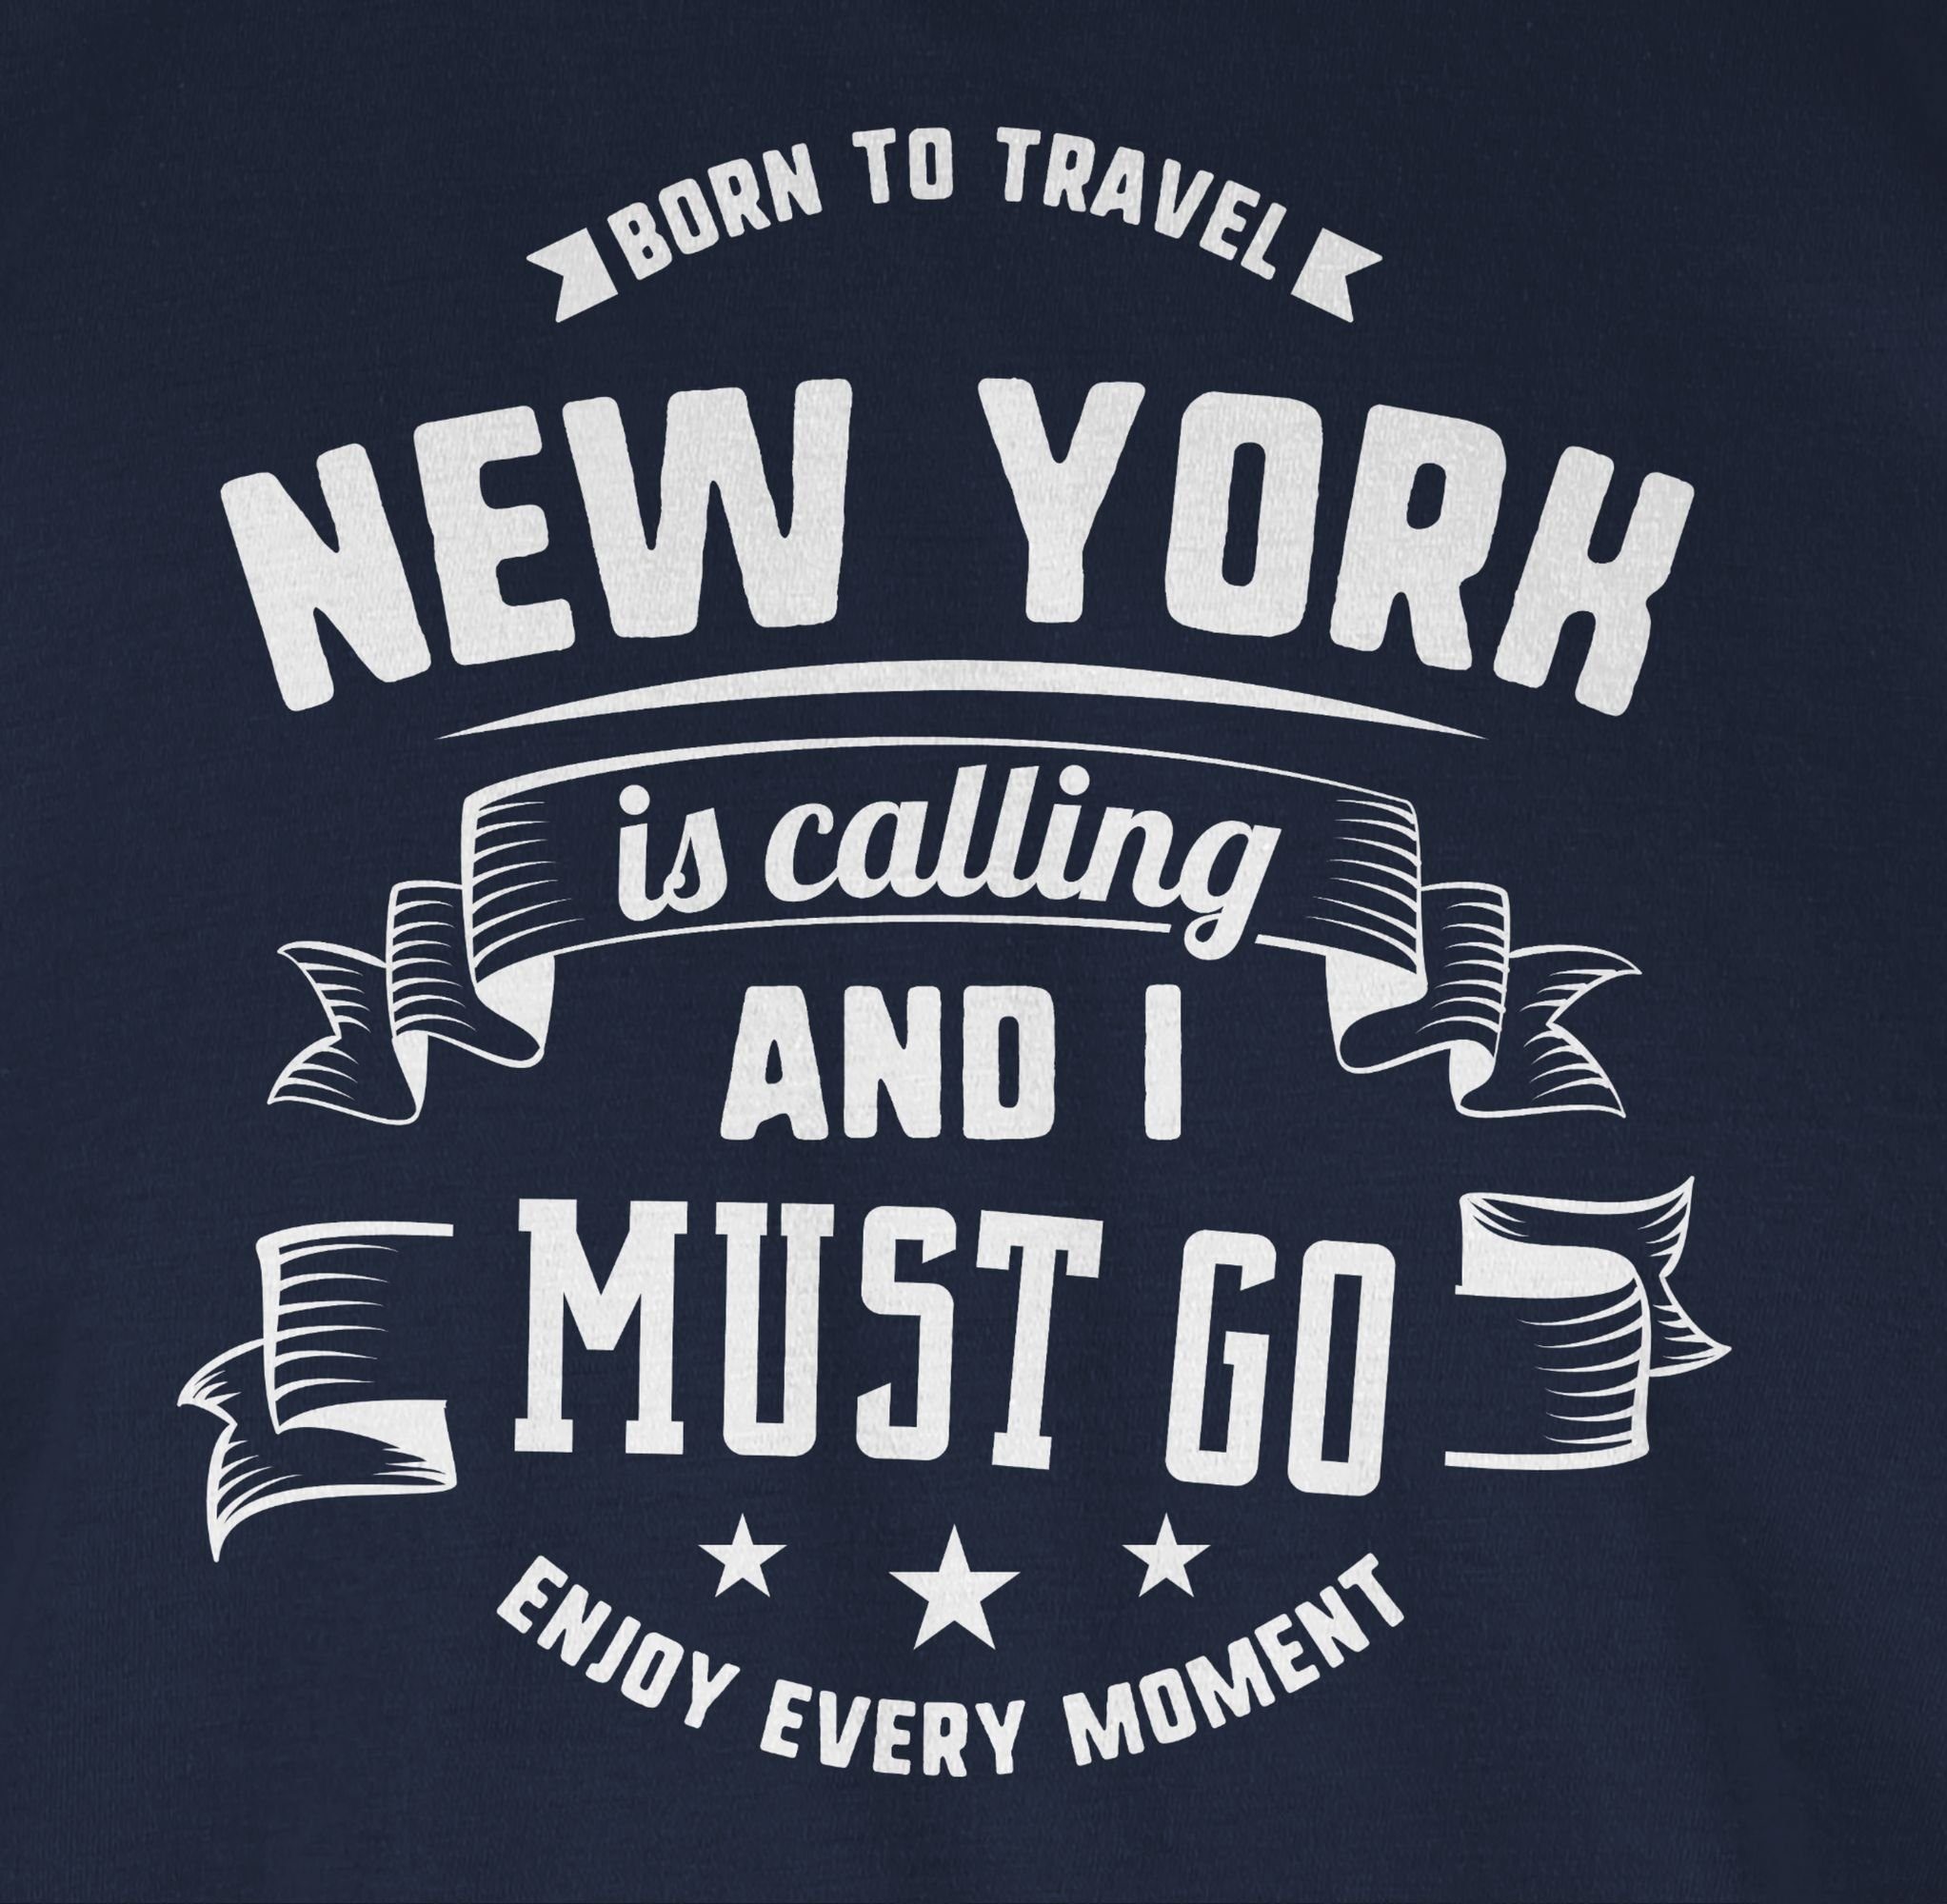 Shirtracer T-Shirt New York go and Weiß und 01 Outfit Navy Stadt is I City Blau calling must